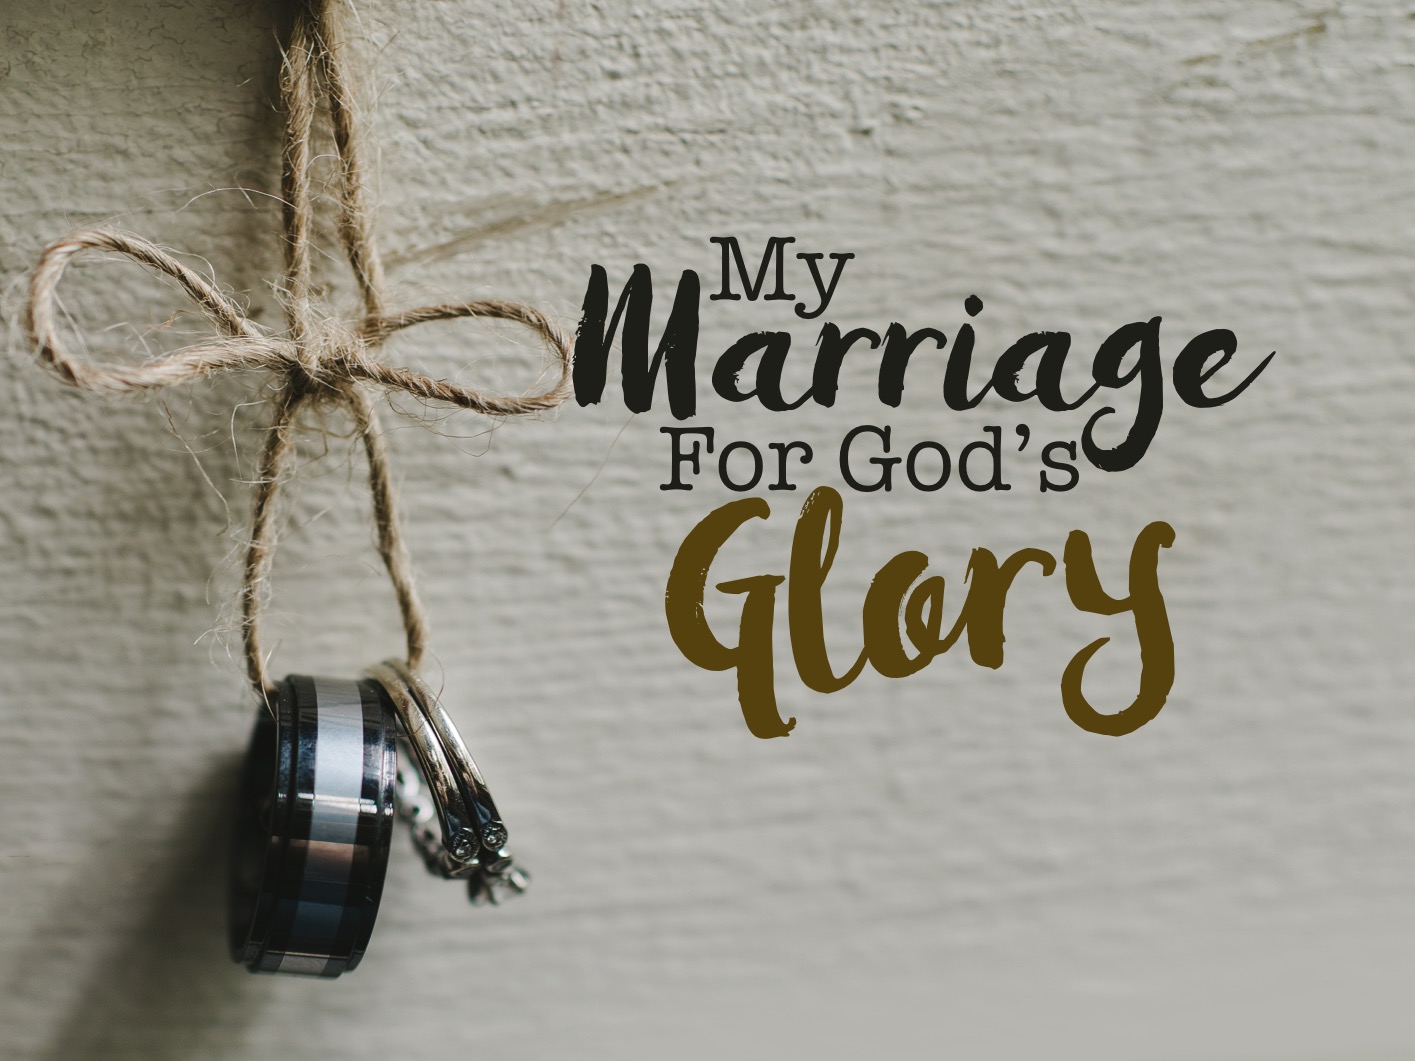 My Marriage For God’s Glory: Sunday September 30, 2018